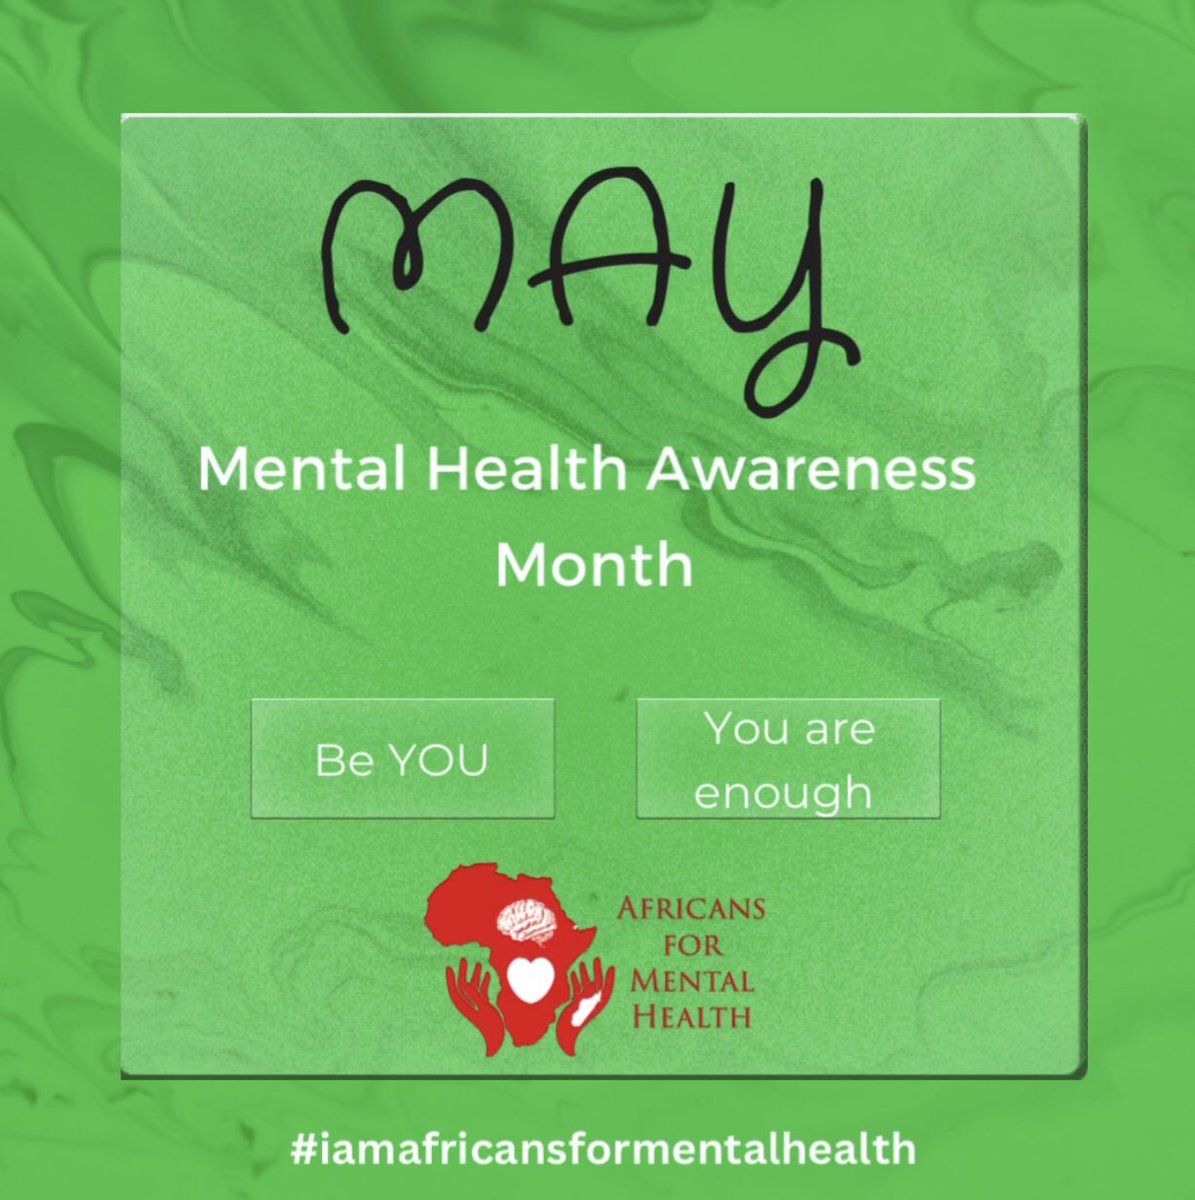 May is #MentalHealthAwarenessMonth take time to focus on your #mentalhealth 💚 Be kind to yourself always and #itsokaytonotbeokay 💚.#iamafricansformentalhealth #MentalHealthMatters #youarenotalone #youareawesome